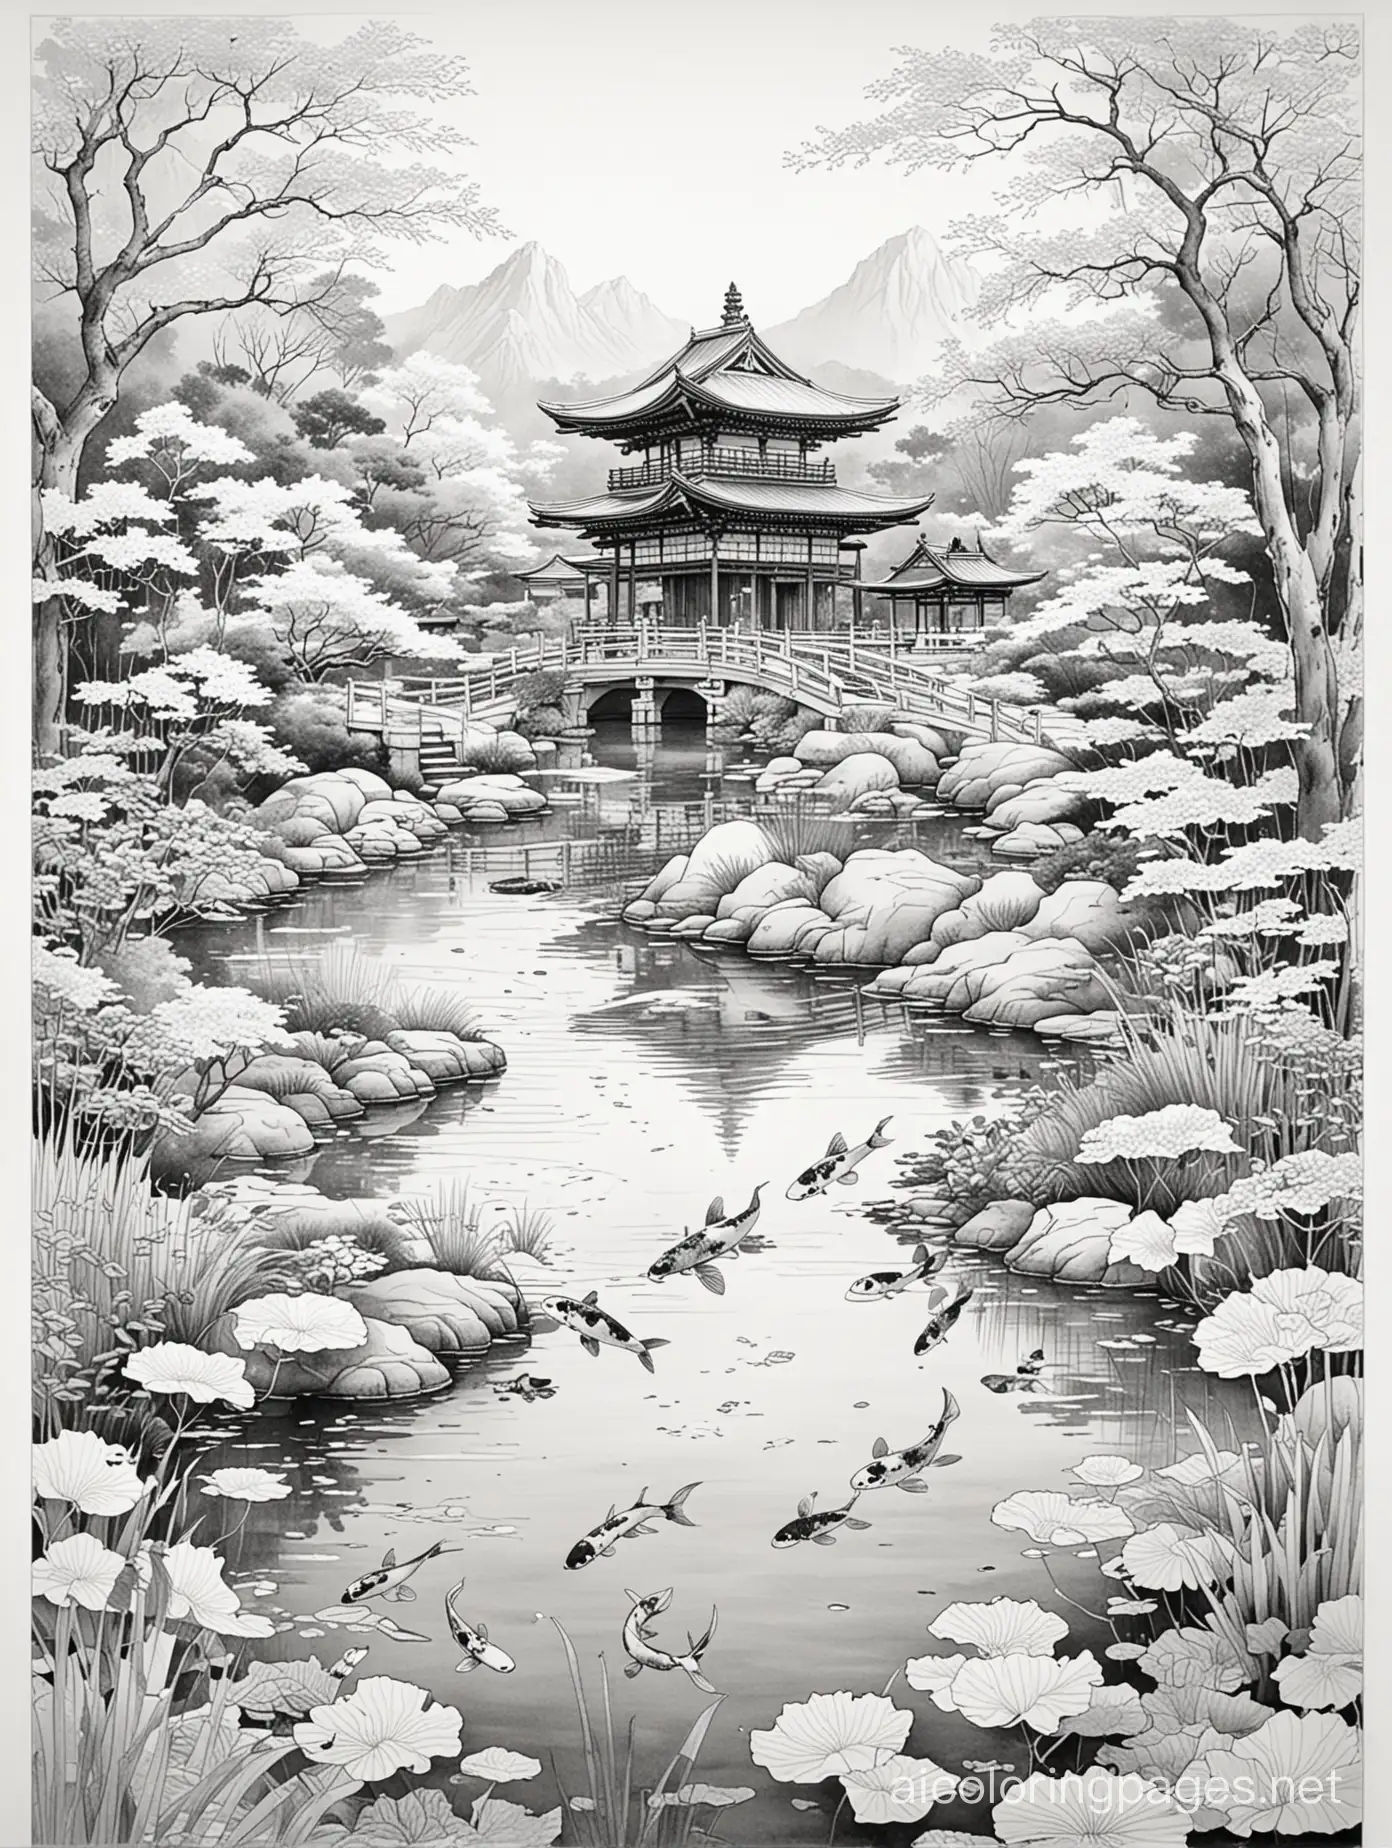 Watercolor painting, Japanese style, Kojiki, mythology, building, coloring book, thin lines, no color, black and white, koi pond, dry landscape, temple garden, Coloring Page, black and white, line art, white background, Simplicity, Ample White Space. The background of the coloring page is plain white to make it easy for young children to color within the lines. The outlines of all the subjects are easy to distinguish, making it simple for kids to color without too much difficulty